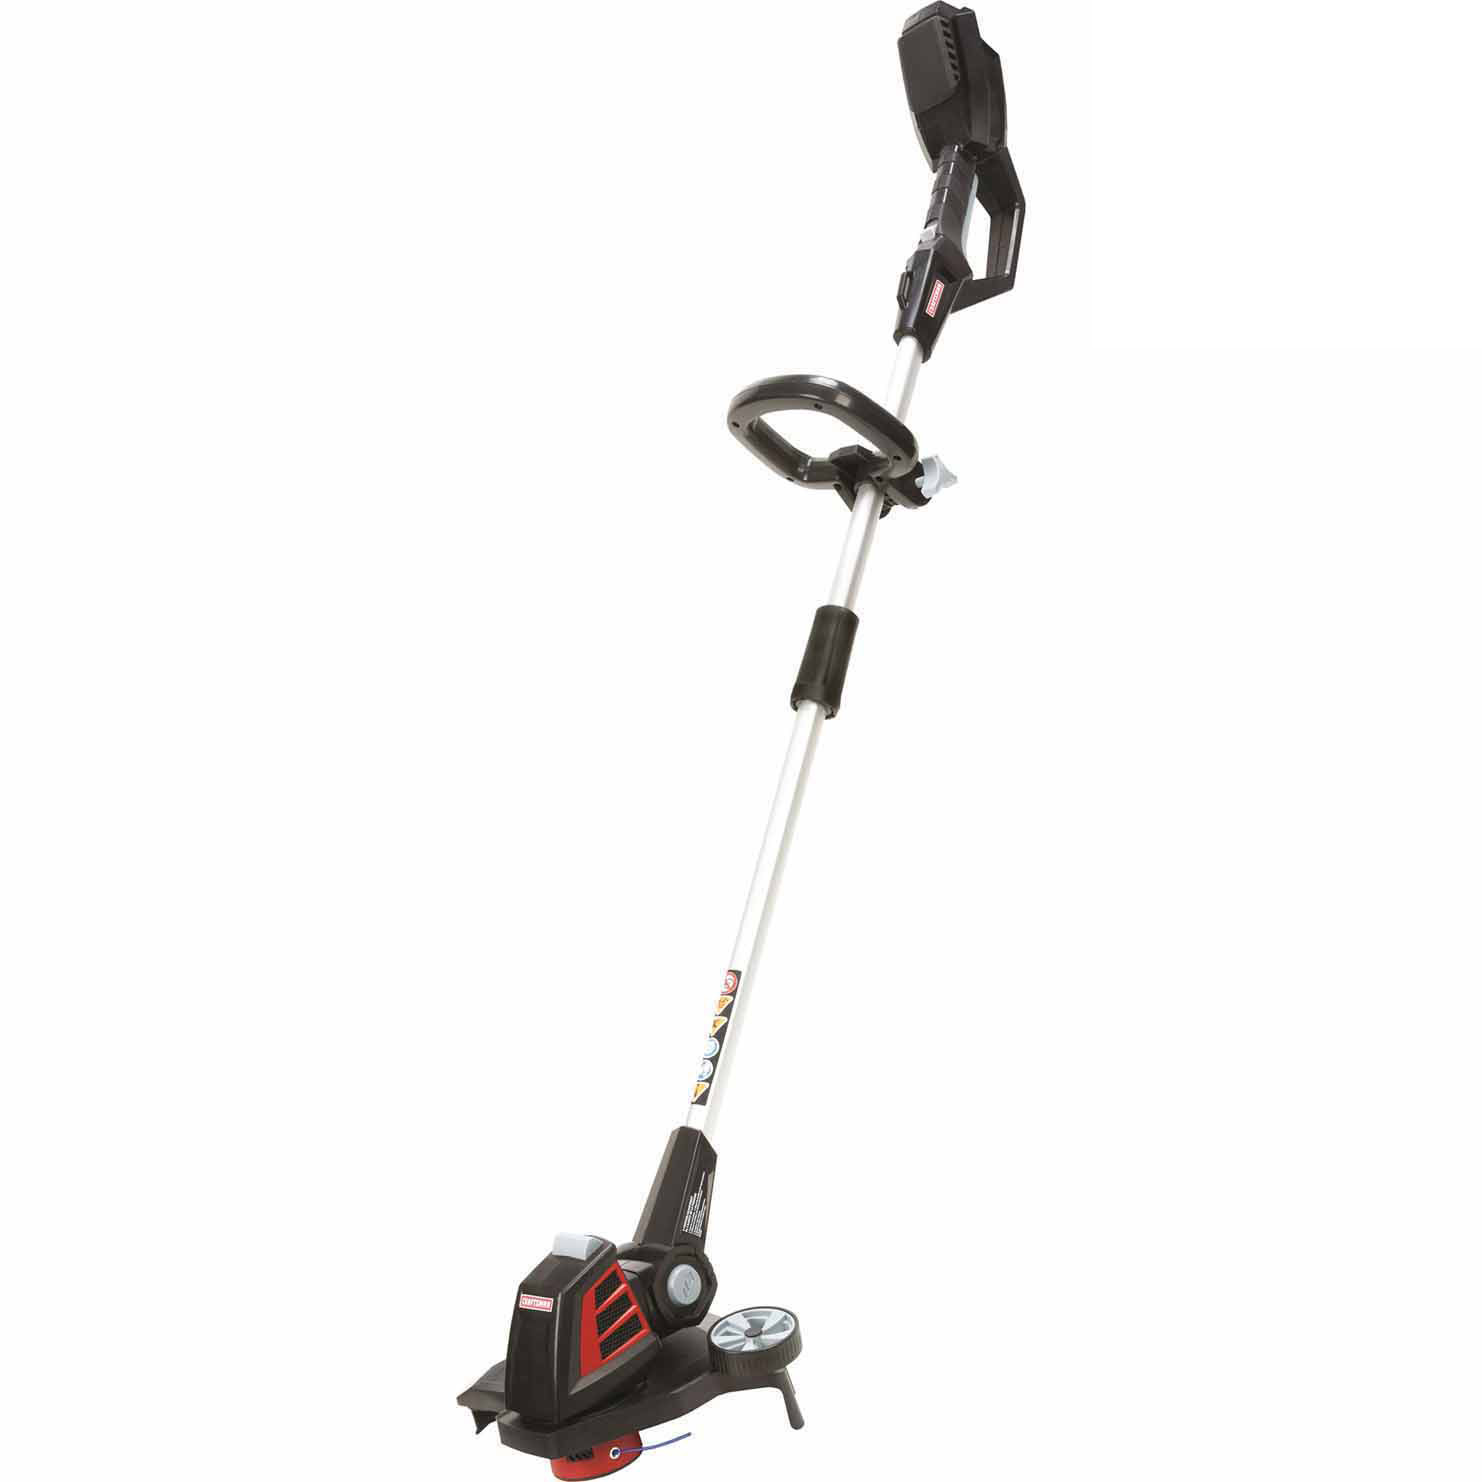 Craftsman 2100301 40V Cordless String Trimmer - Battery and Charger sold separately